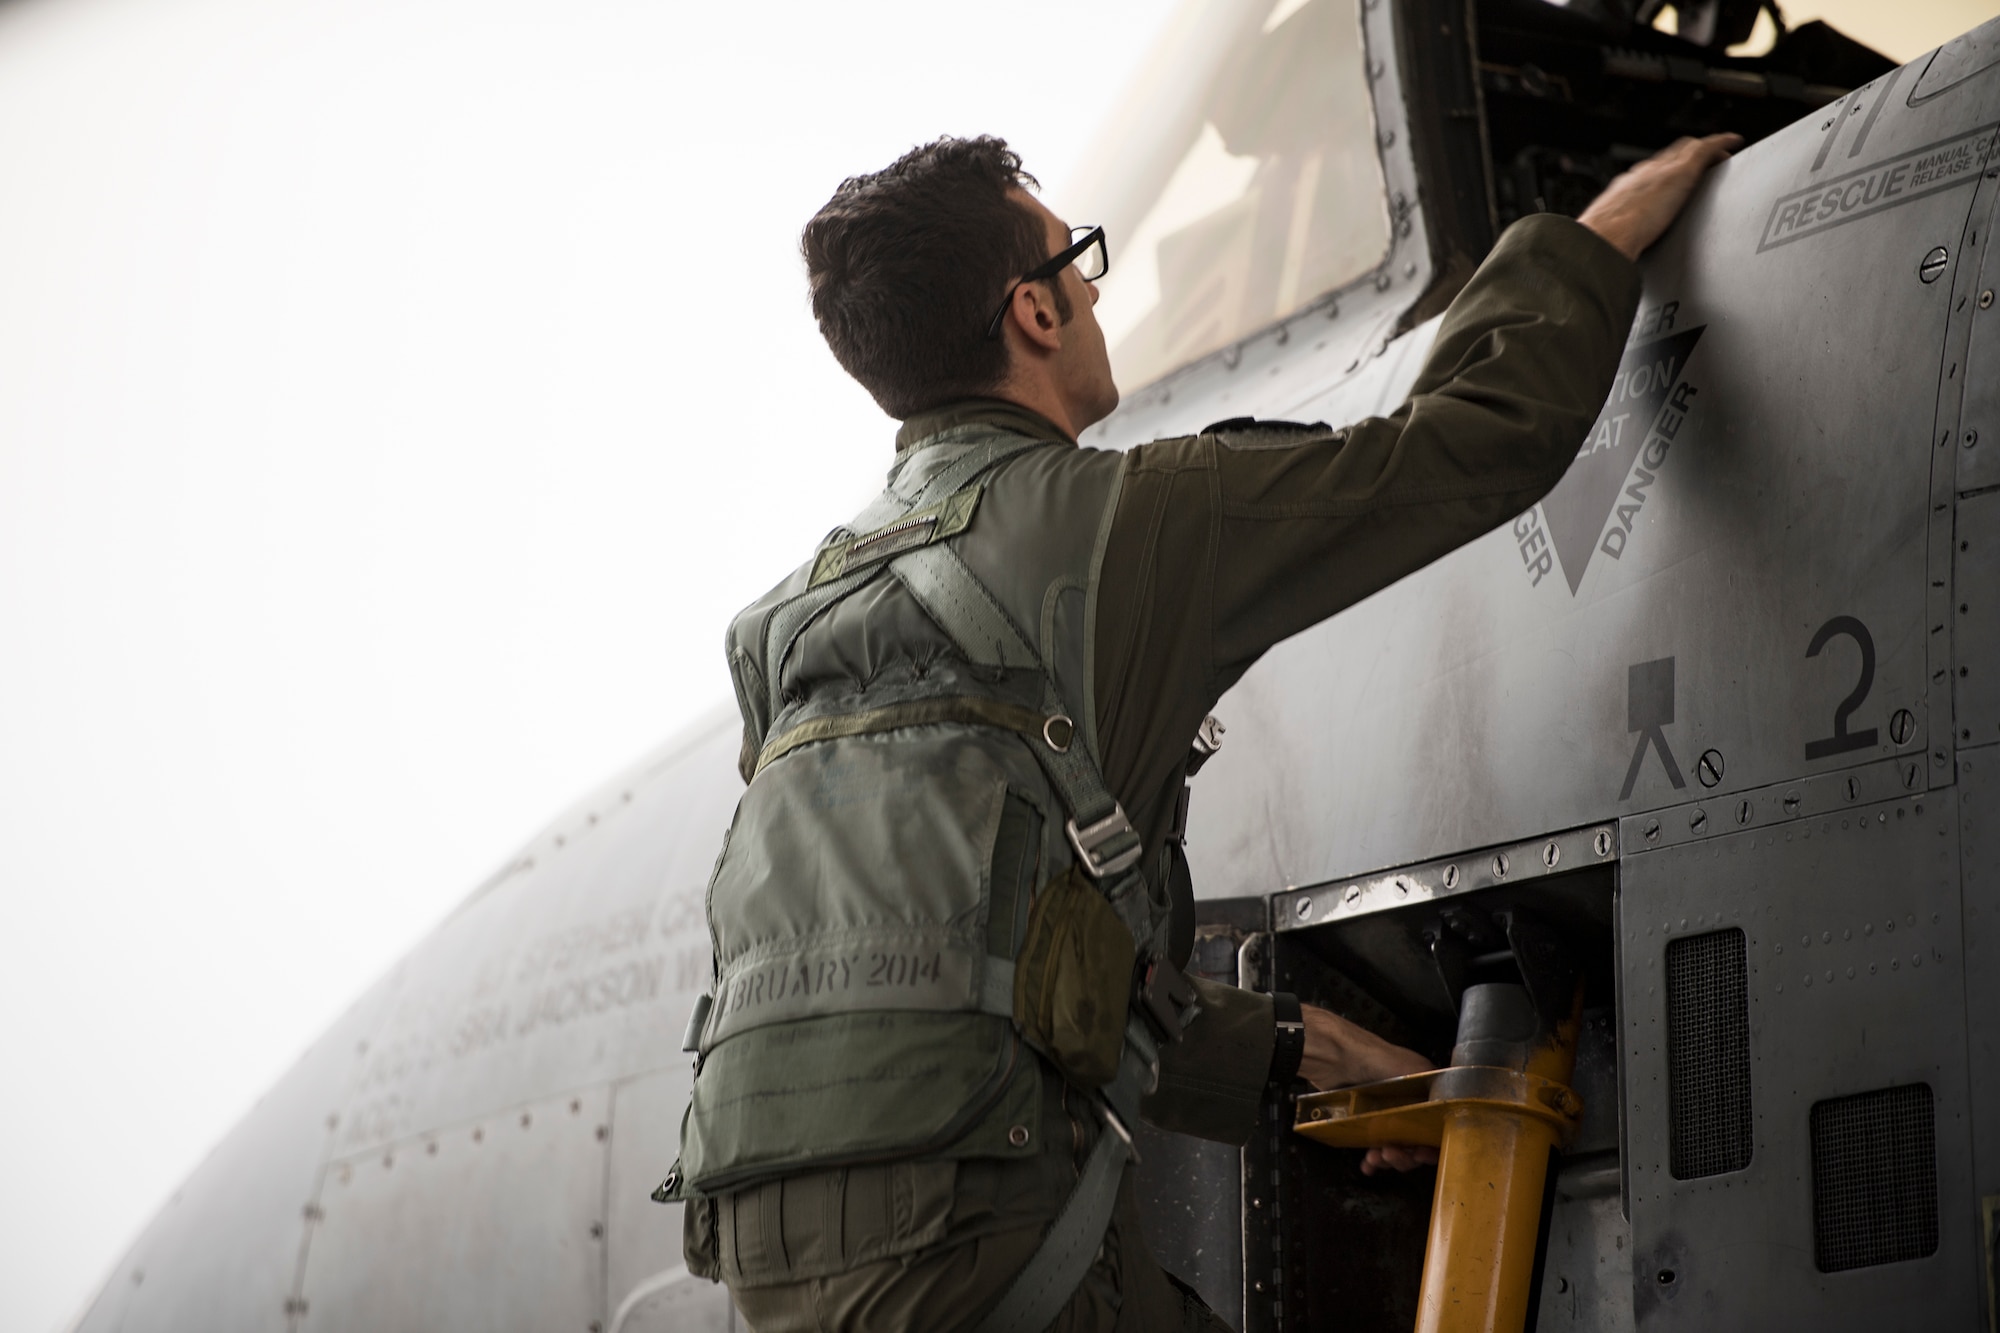 Capt. Maurice Grosso, 75th Fighter Squadron A-10C Thunderbolt II pilot, climbs into the cockpit prior to a sortie, Dec. 6, 2017, at Moody Air Force Base, Ga. Moody’s week-long, Phase 1, Phase 2 exercise is designed to demonstrate the 23d Wing’s ability to meet combatant commander objectives and tested the pilots’ and maintainers’ ability to launch around-the-clock sorties at an accelerated rate during a sortie surge. (U.S. Air Force photo by Staff Sgt. Ryan Callaghan)